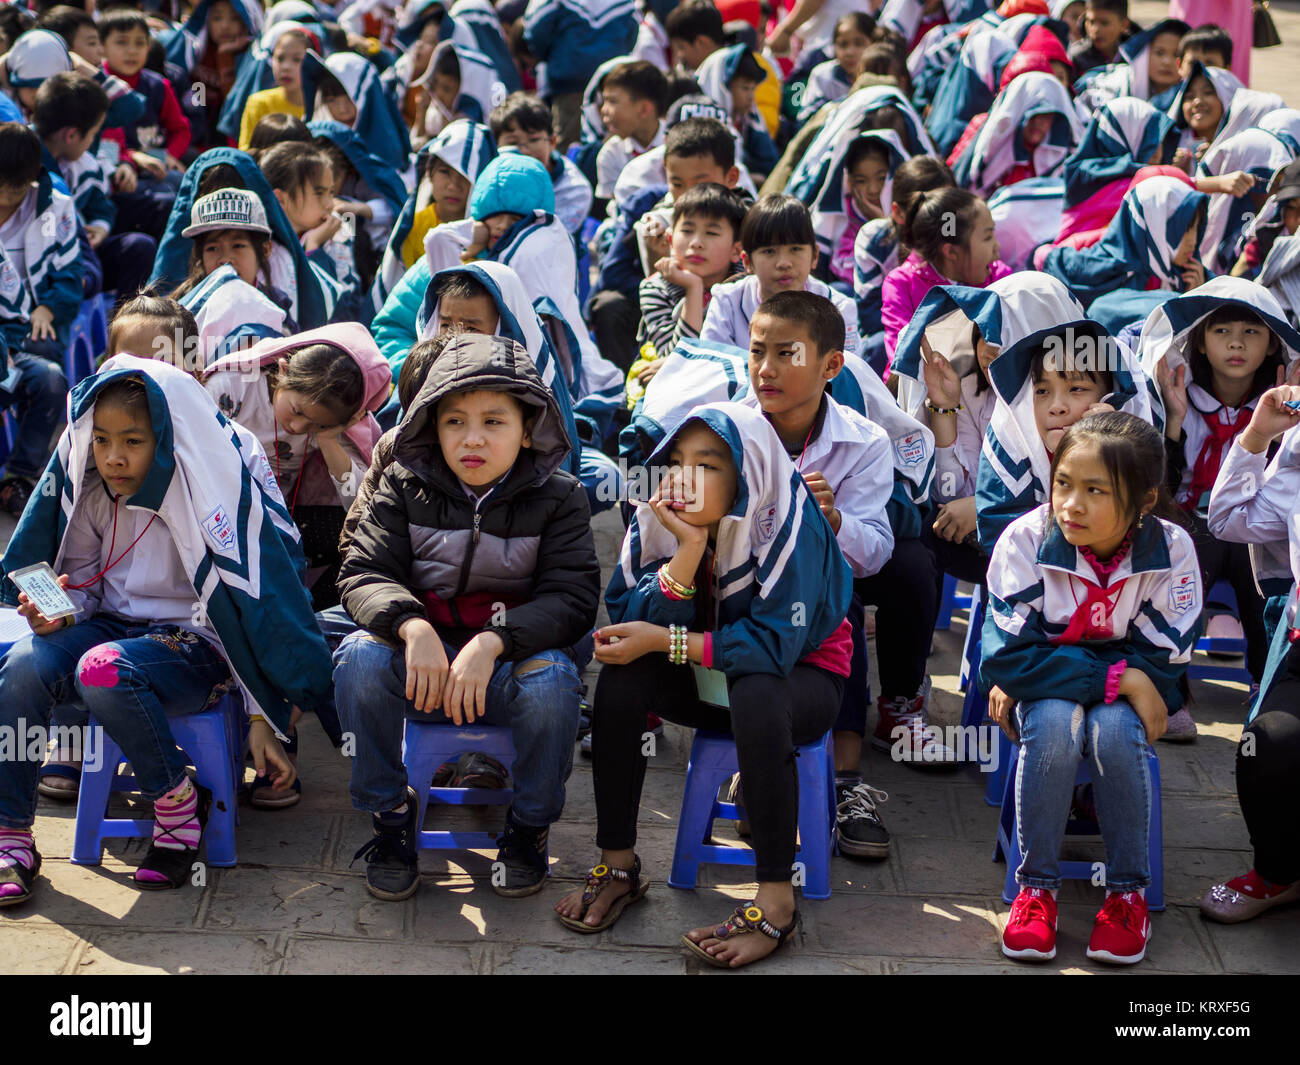 Hanoi, Ha Noi, Vietnam. 21st Dec, 2017. Children at an assembly in the Temple of Literature, a Confucian temple dedicated to learning and the humanities. It was also Vietnam's first national university. The temple was built in 1070 at the time of Emperor LÃ½ ThÃ¡nh TÃ´ng. It is one of several temples in Vietnam which is dedicated to Confucius, sages and scholars. Credit: Jack Kurtz/ZUMA Wire/Alamy Live News Stock Photo